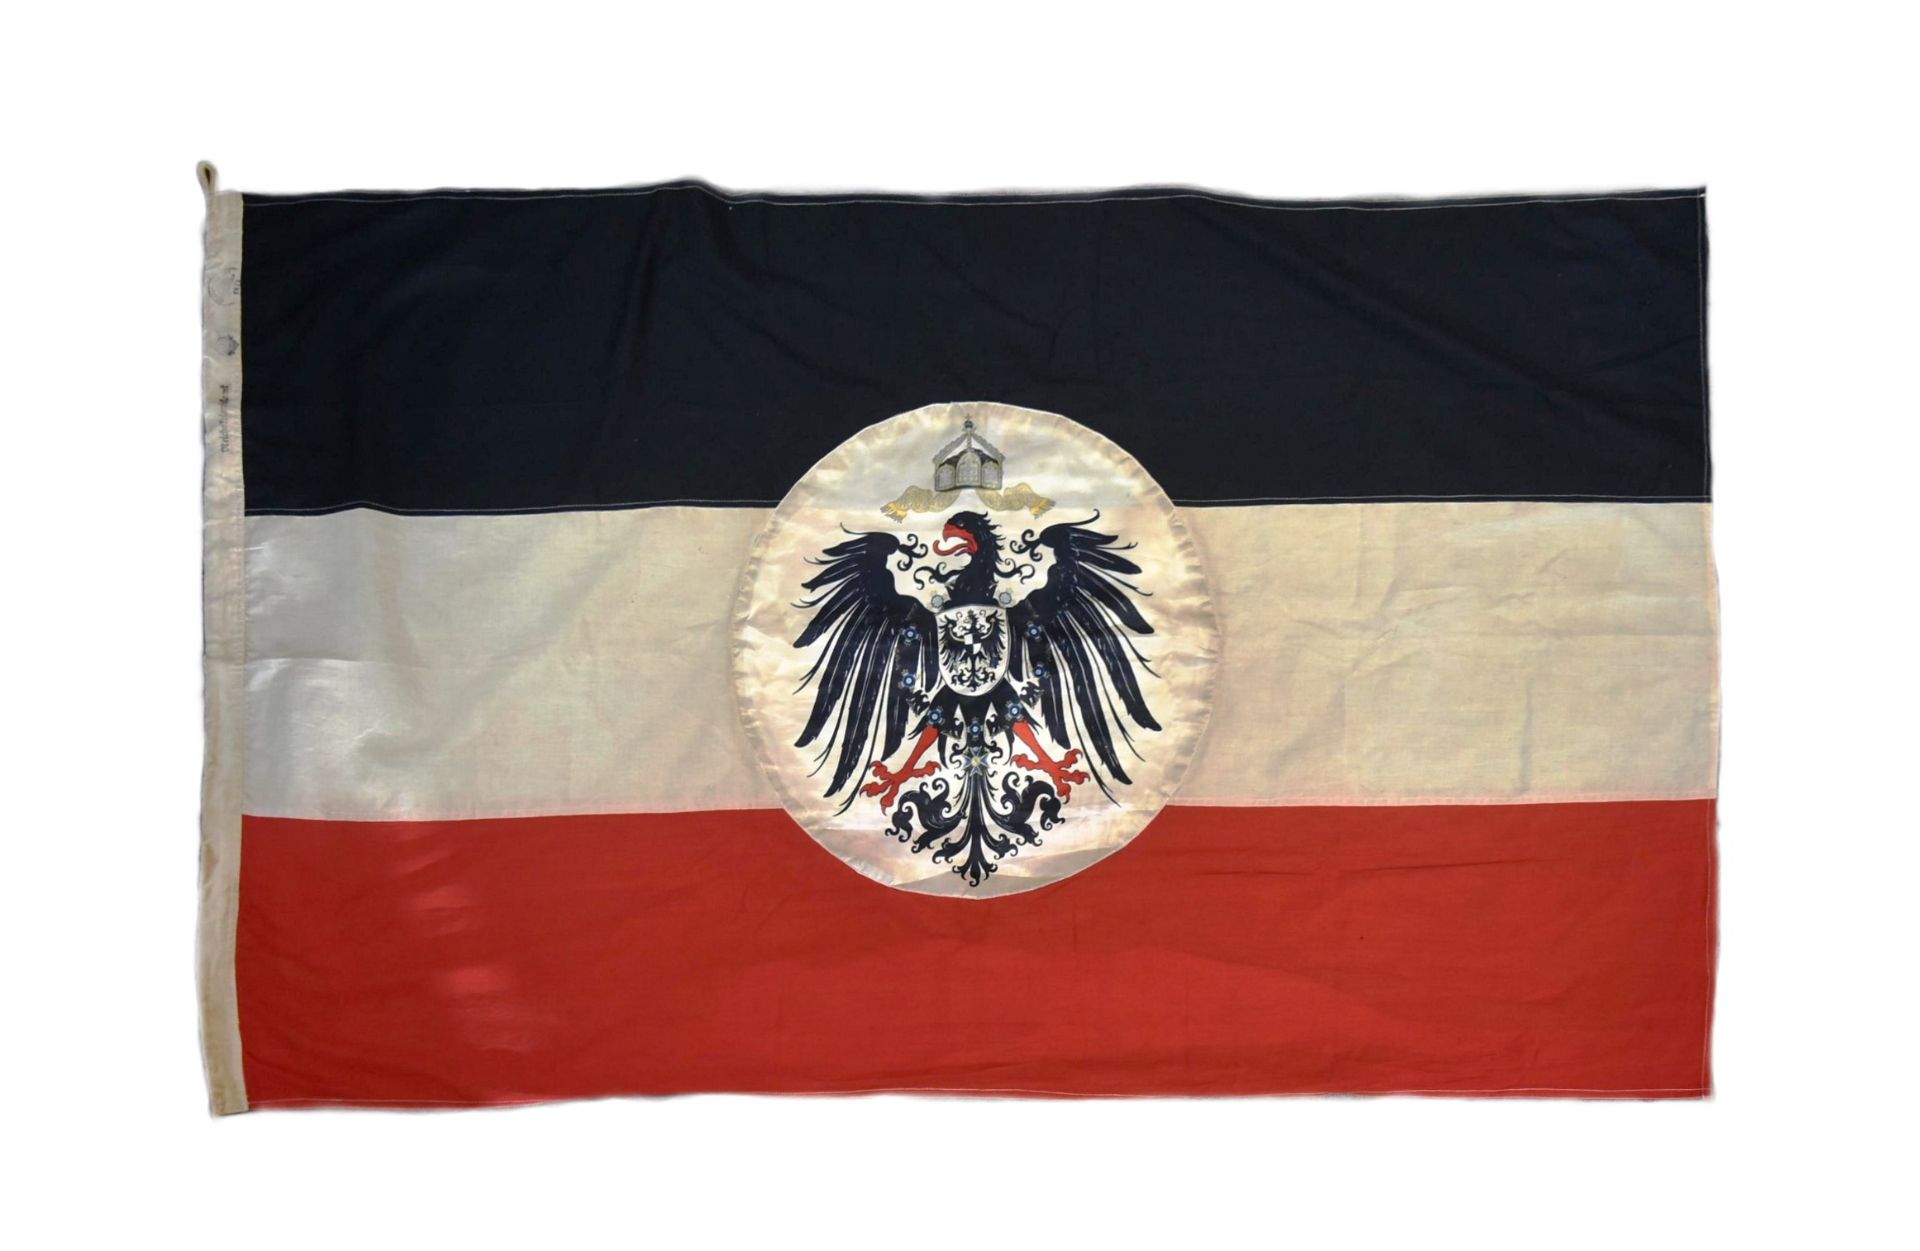 WWI FIRST WORLD WAR IMPERIAL GERMAN EMPIRE COLONIAL WAR FLAG